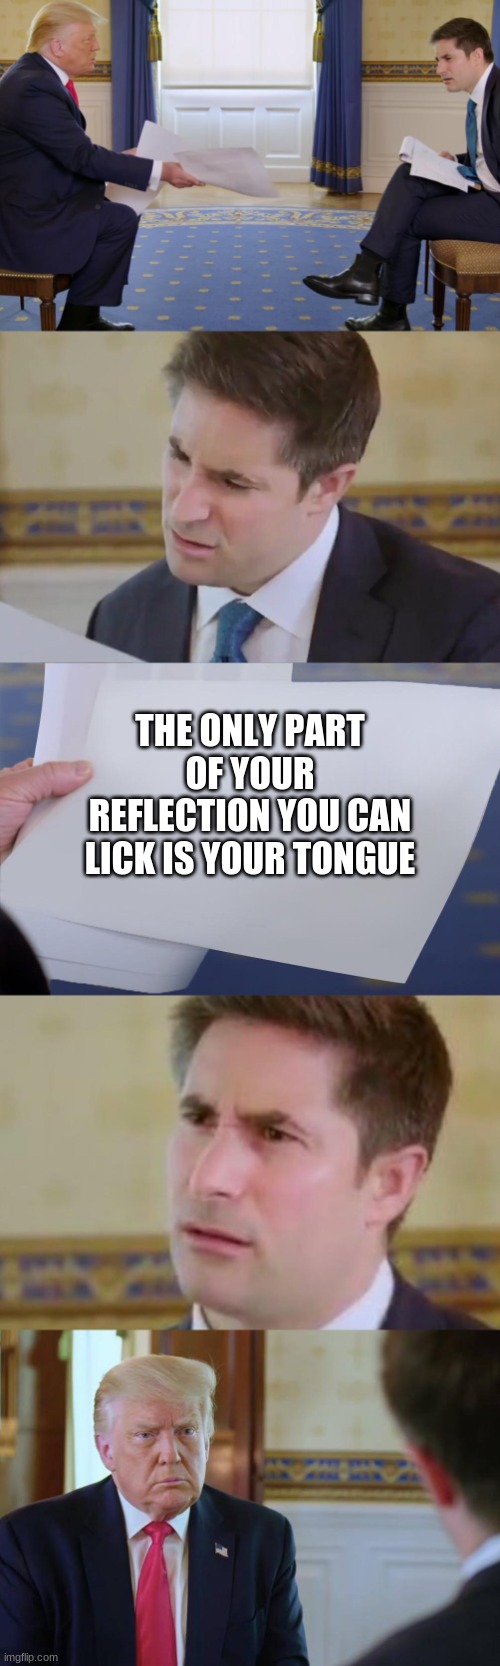 Johnathan Swan Reaction | THE ONLY PART OF YOUR REFLECTION YOU CAN LICK IS YOUR TONGUE | image tagged in johnathan swan reaction | made w/ Imgflip meme maker